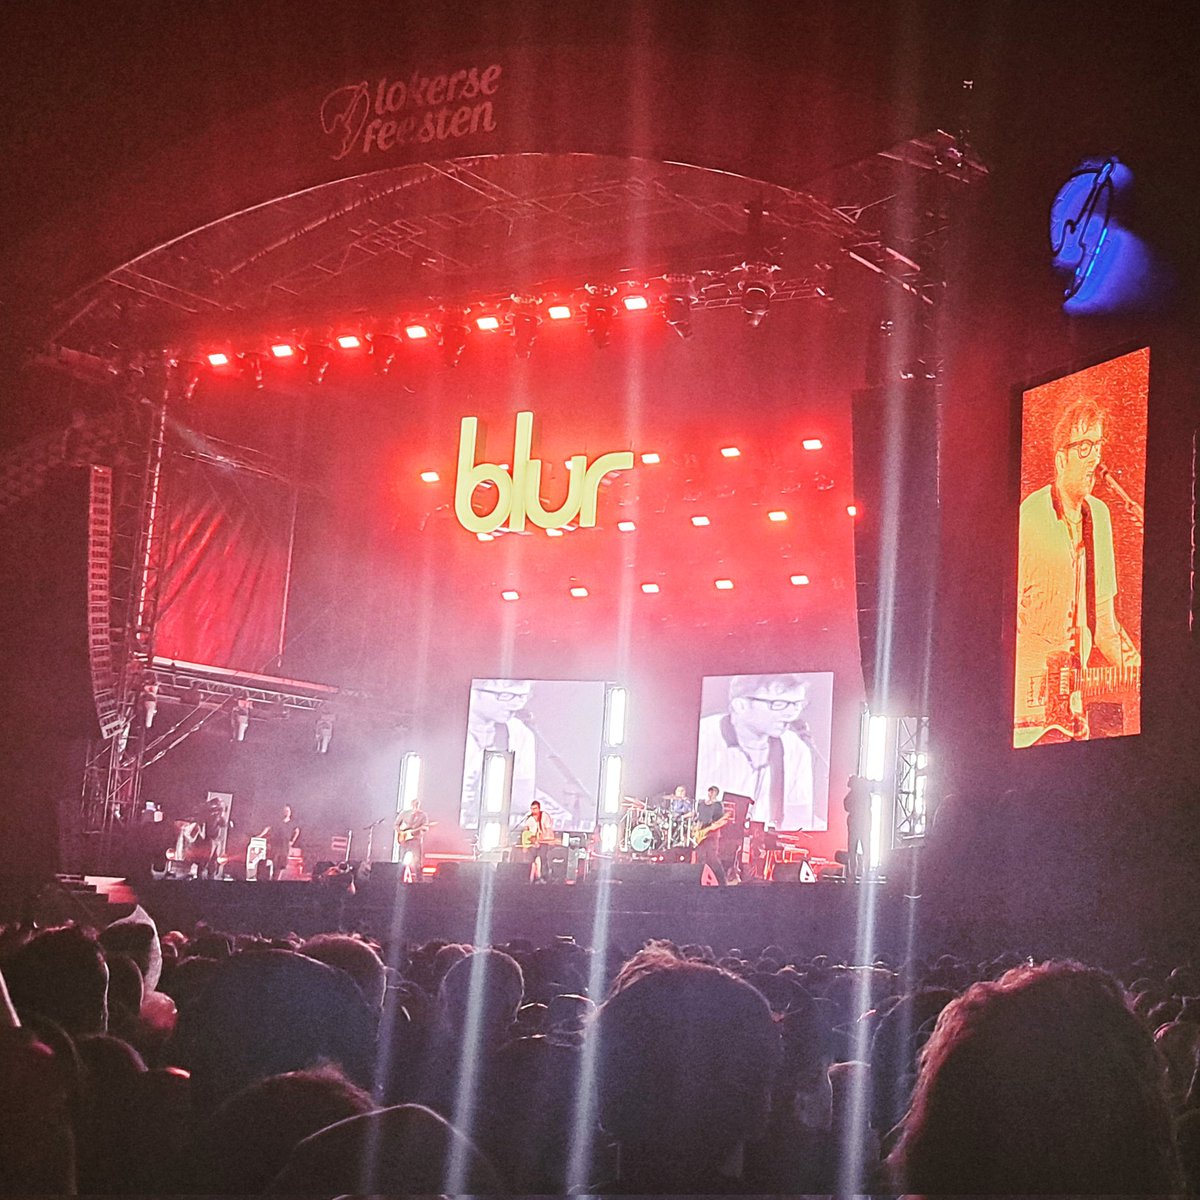 Tender is the night! ✨️ Back to the 90s with Blur! 🤘 #blur #lokersefeesten